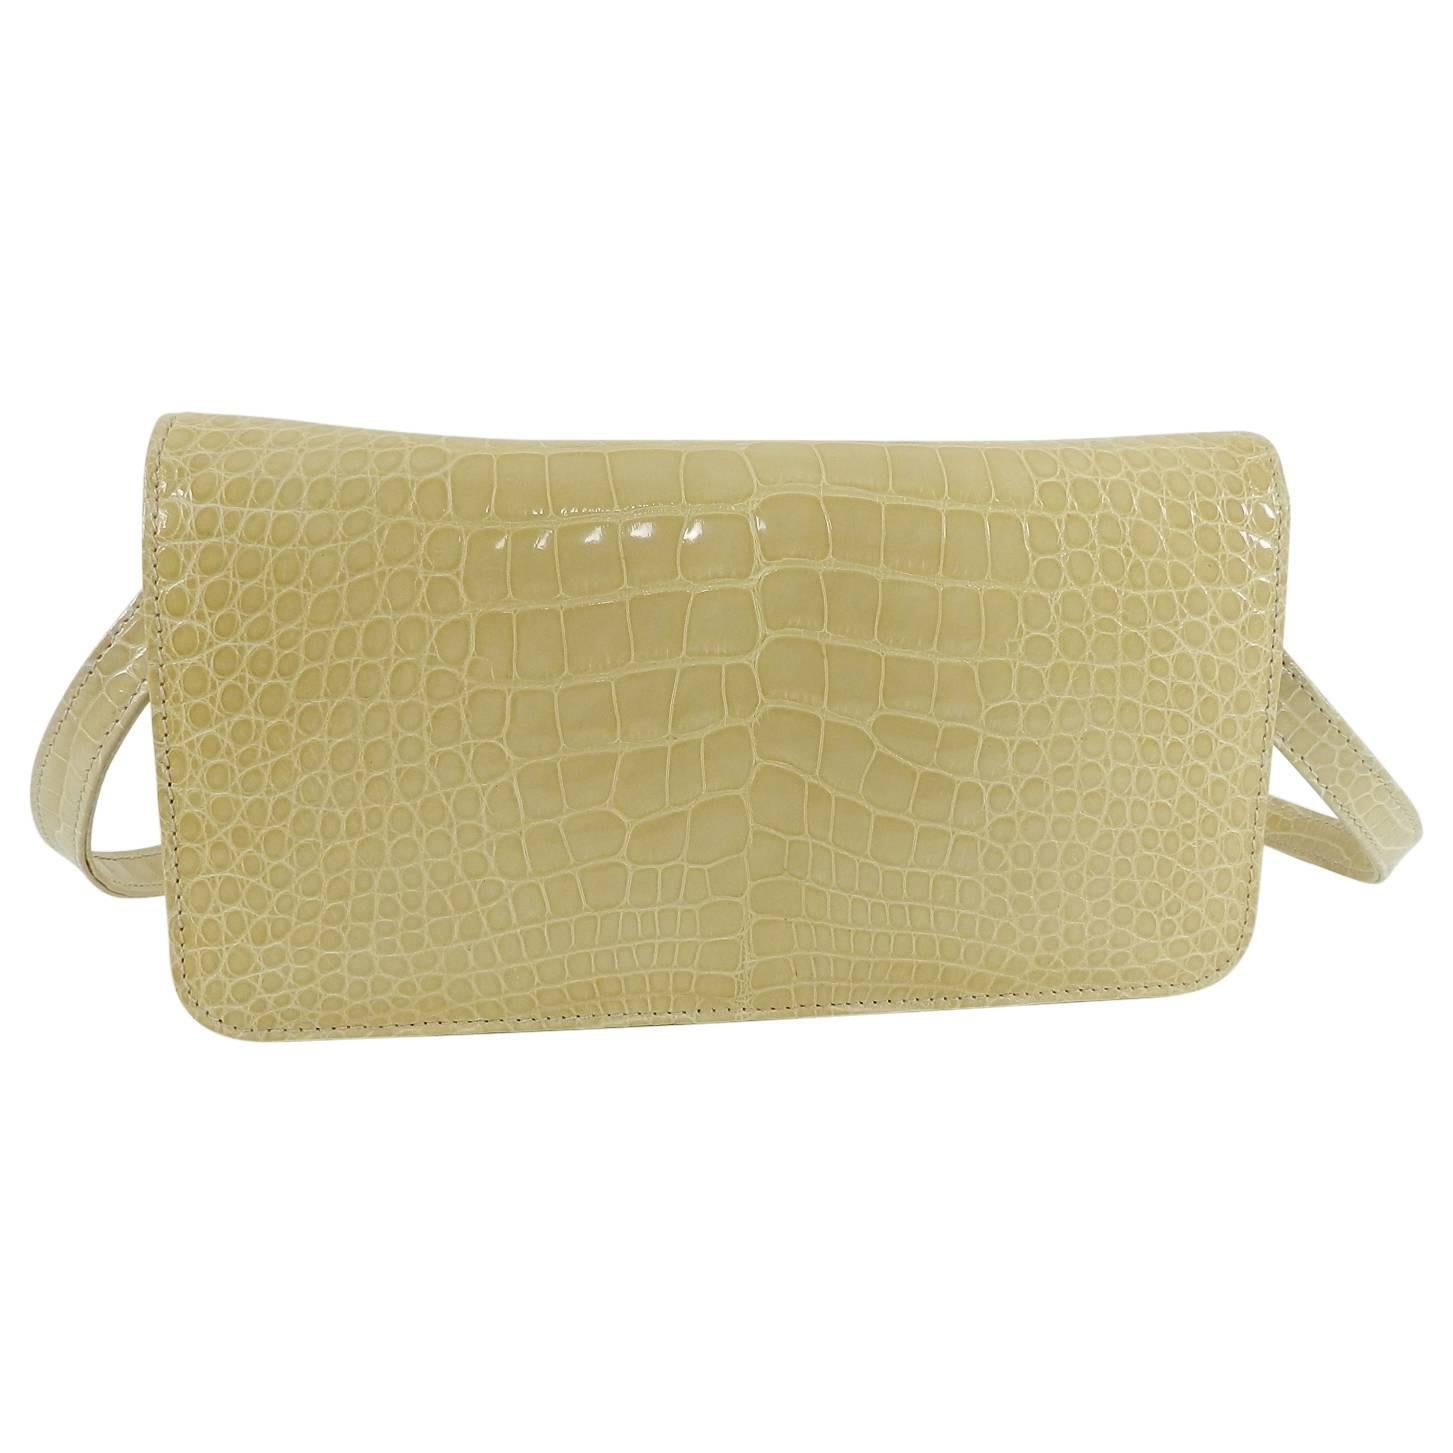 Manolo Blahnik Buttermilk Crocodile Clutch Bag with Strap.  Glossy light buttermilk yellow crocodile skin bag with removable shoulder strap.  Leather lined interior.  Measures 9.25 x 5.25 x 2” with 13.5” strap drop.
